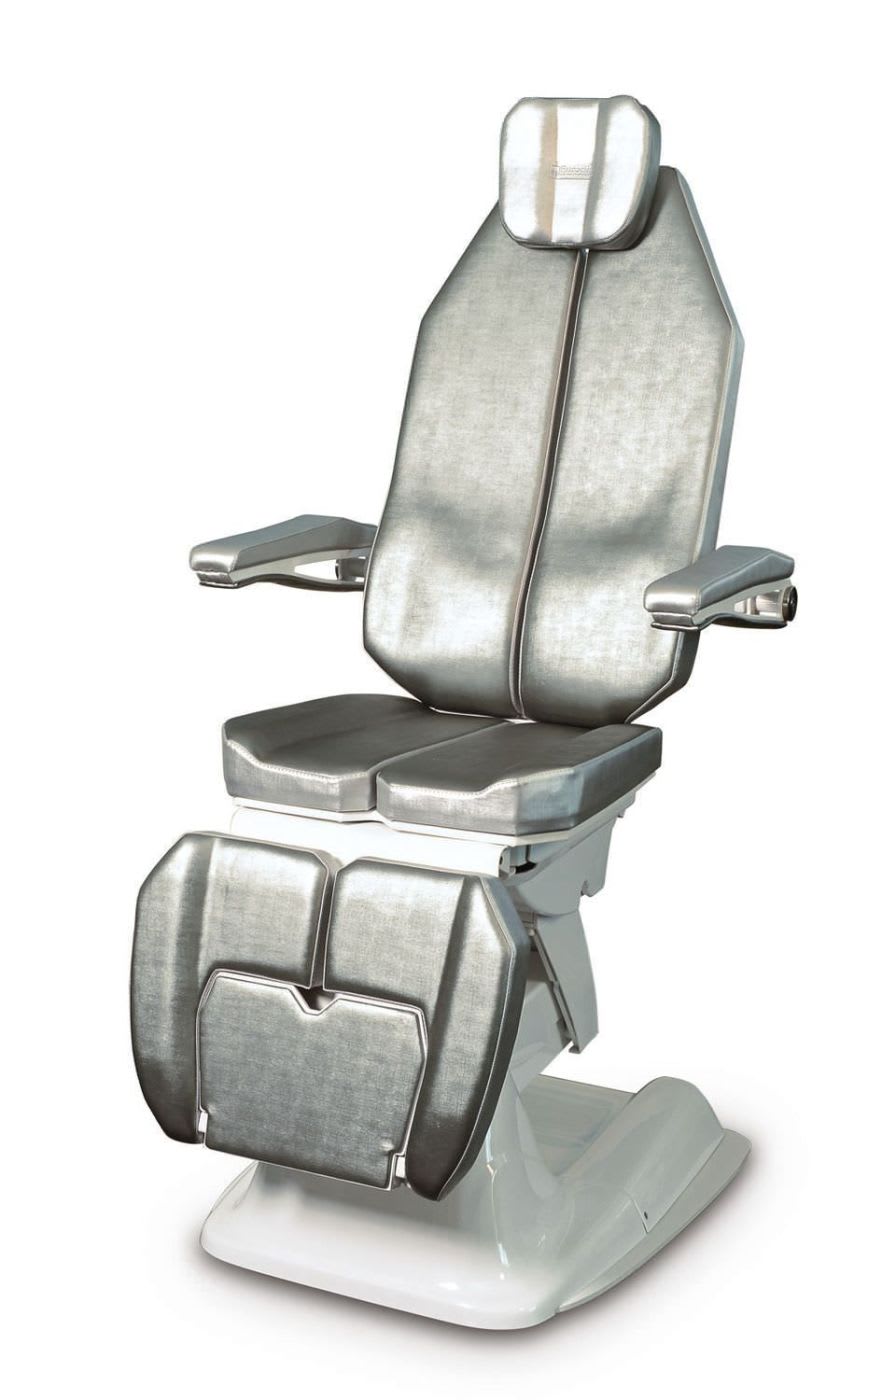 ENT examination chair / electrical / height-adjustable / 3-section LYNEA EVO EUROCLINIC